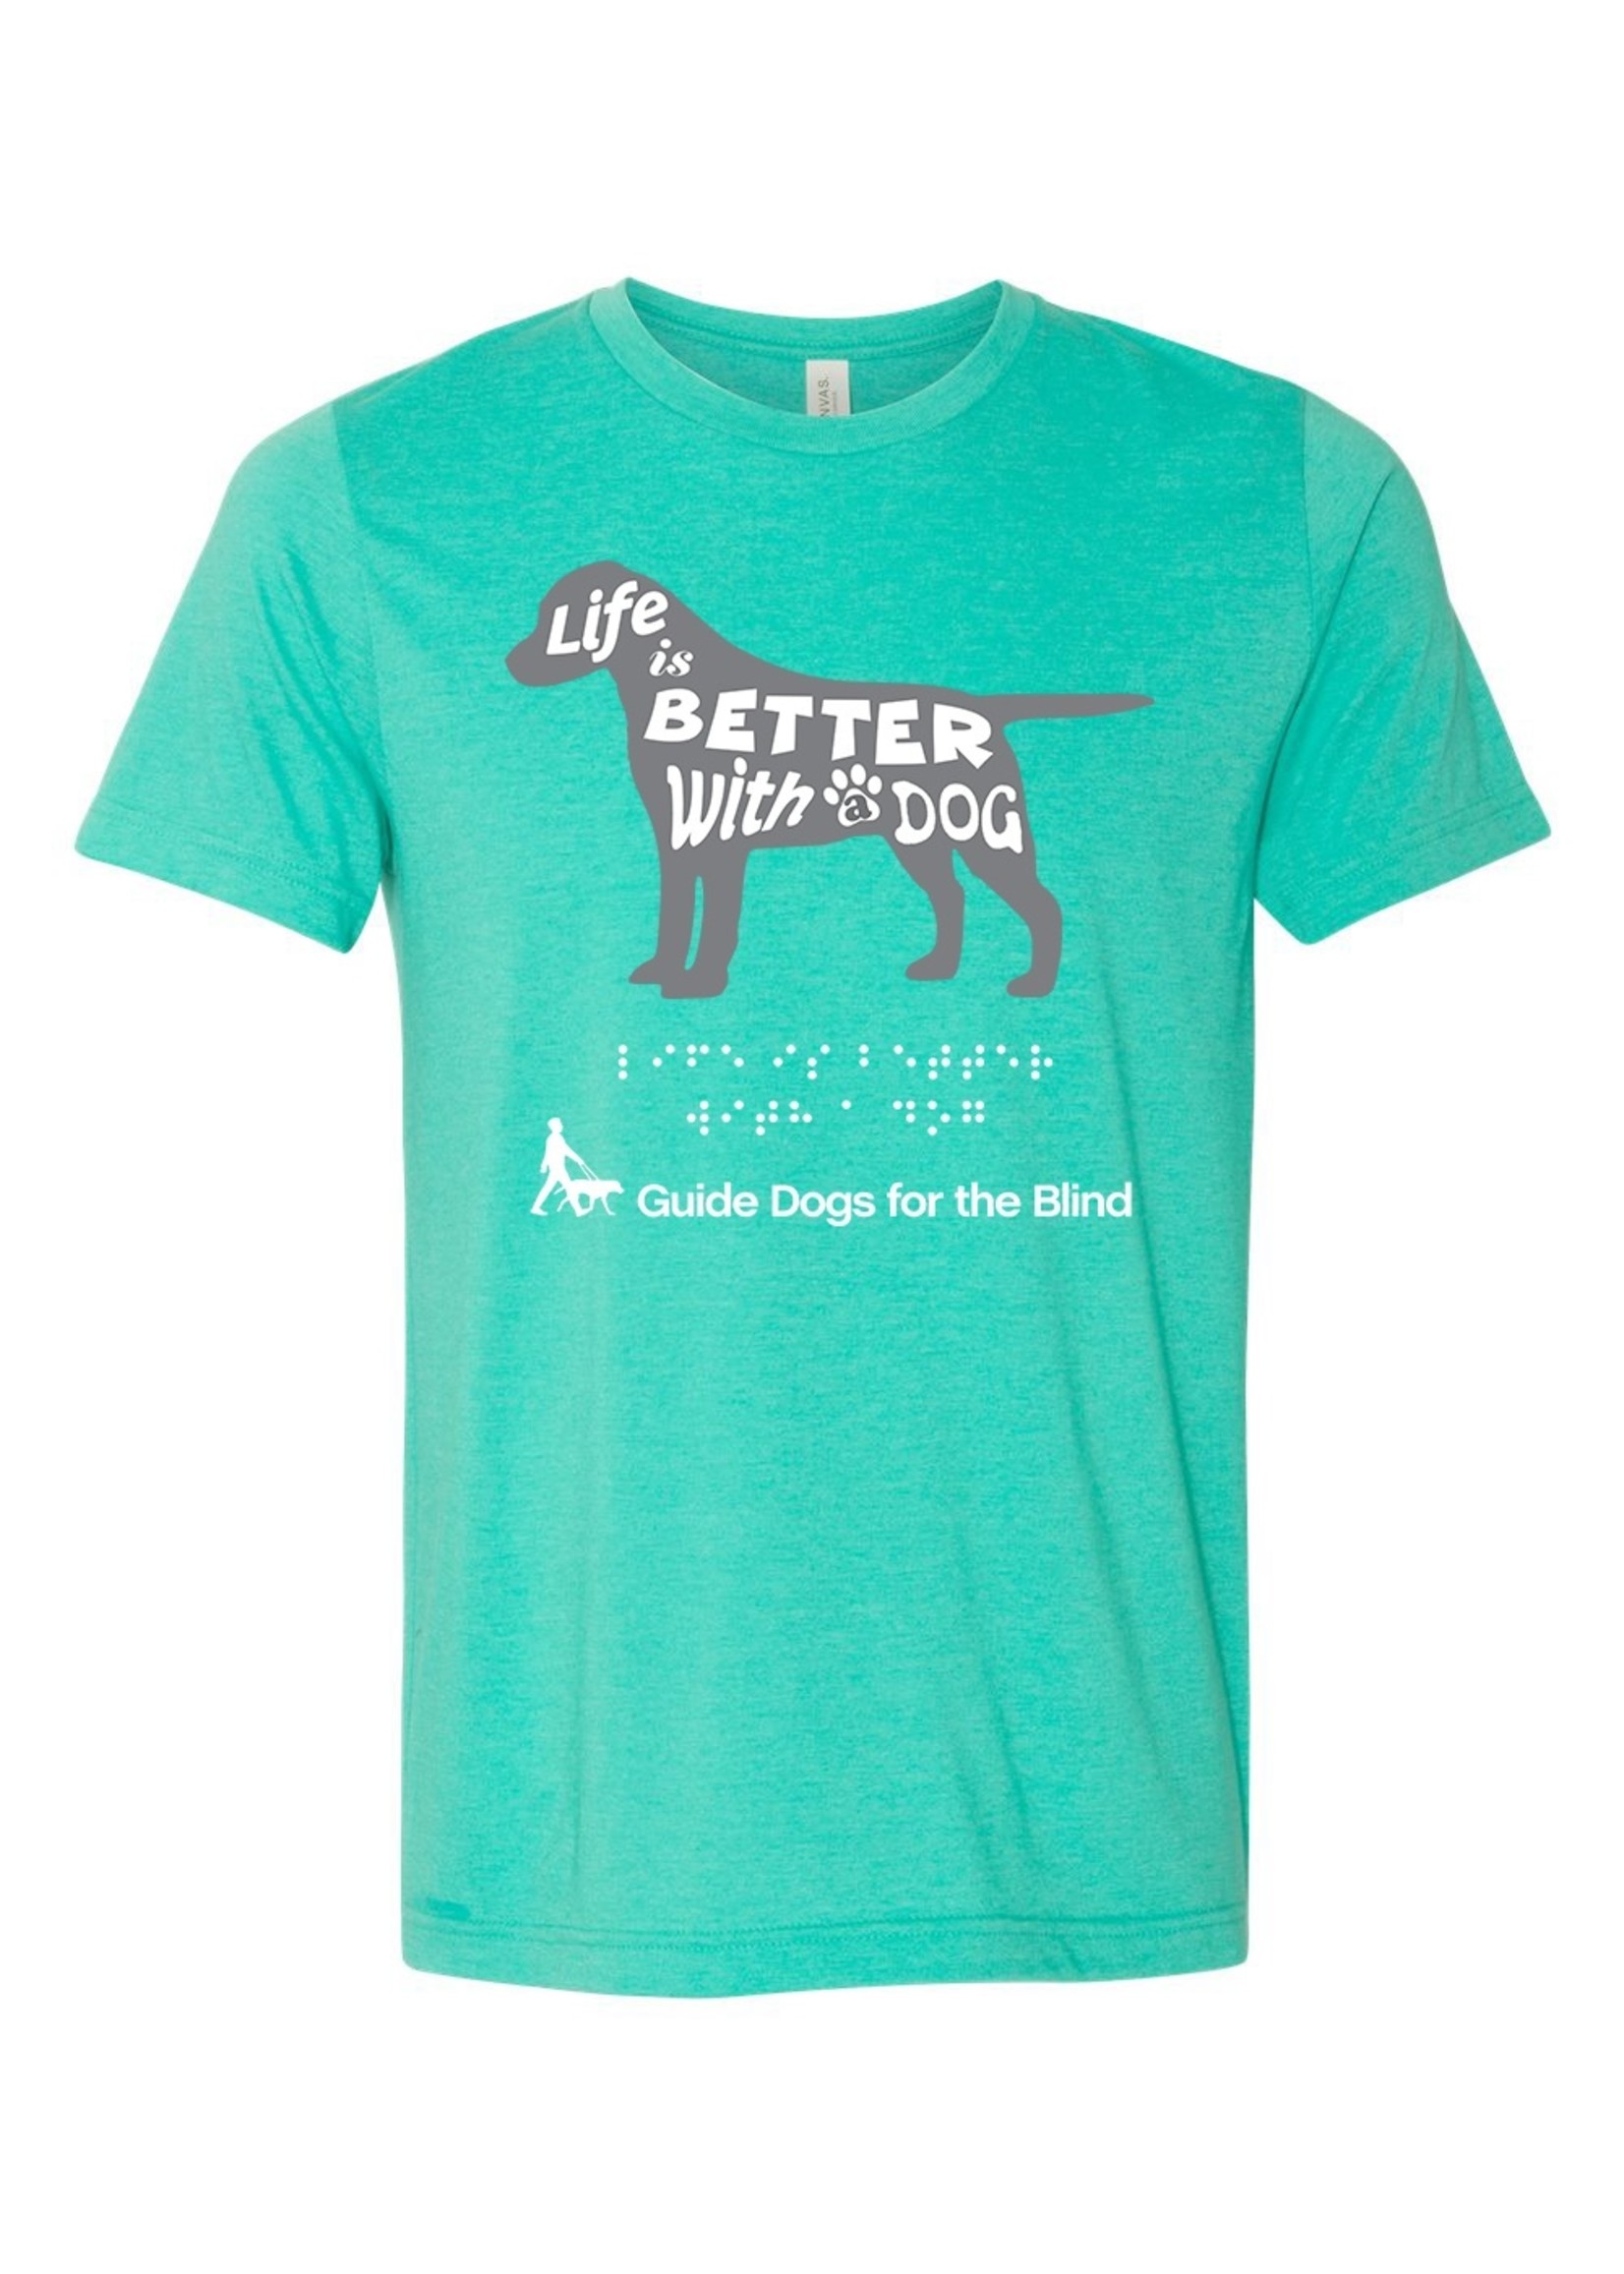 Adult Relaxed Fit Life is Better Tee